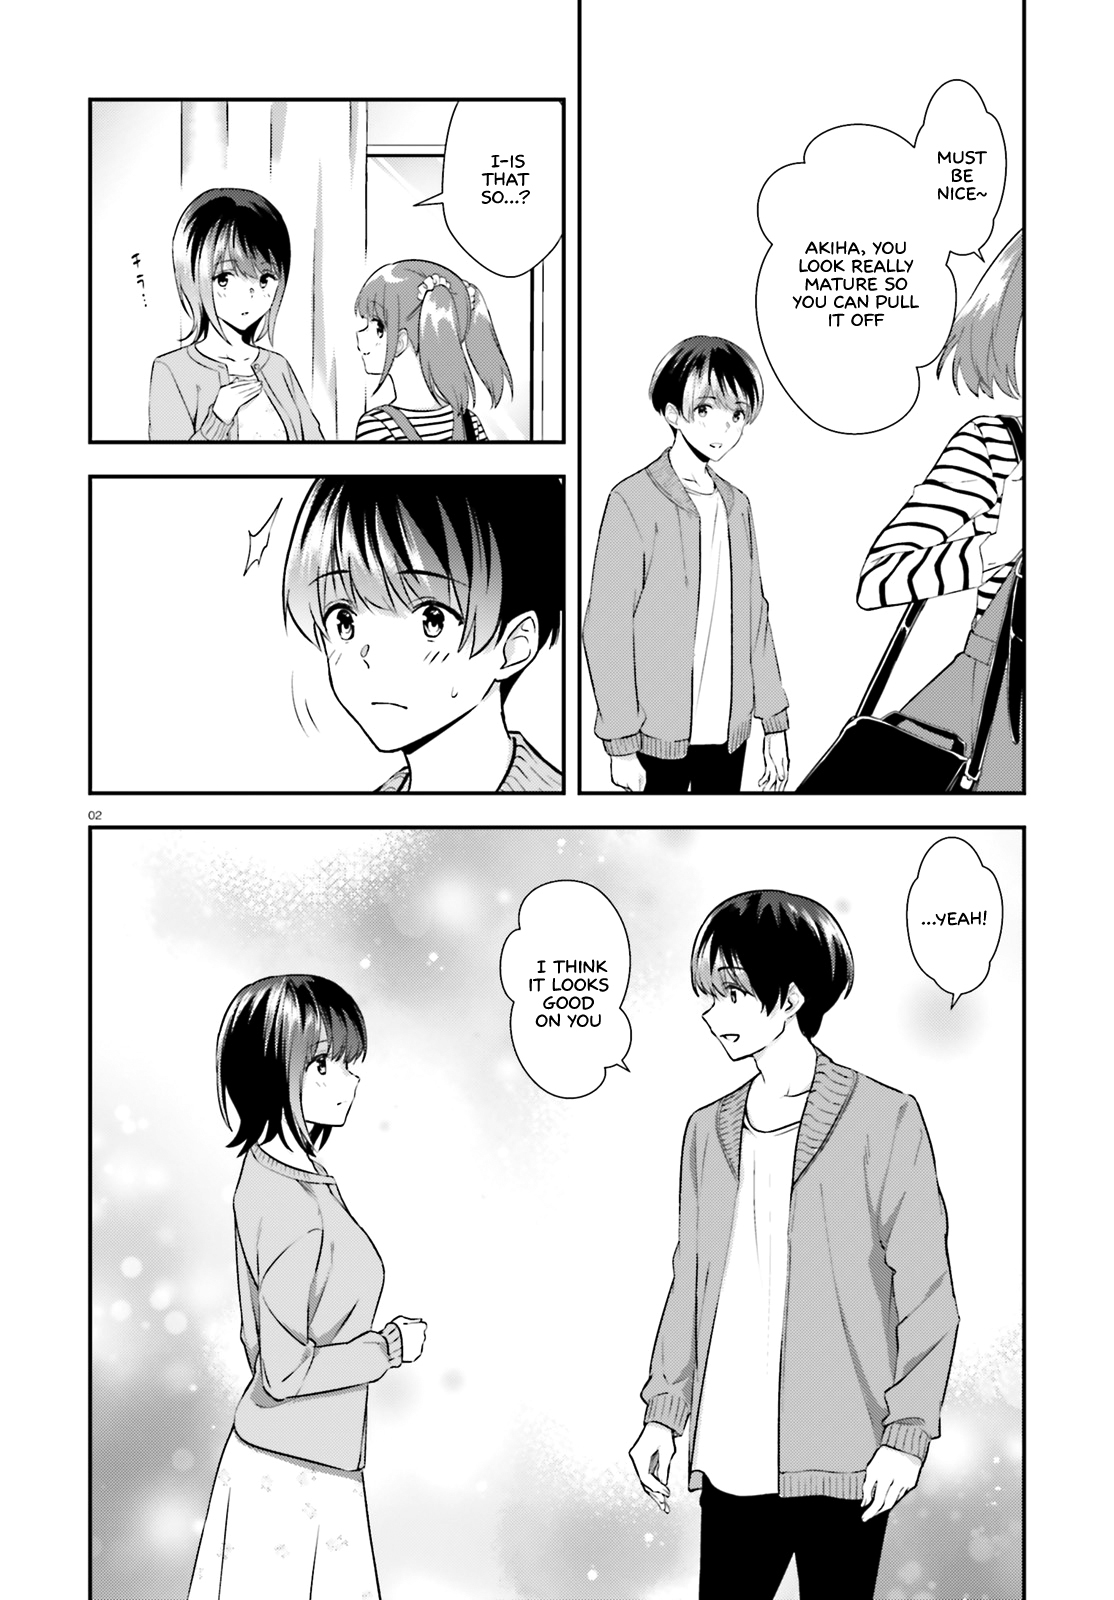 Bizarre Love Triangle Vol.2 Chapter 11: Time With Friends - Picture 3